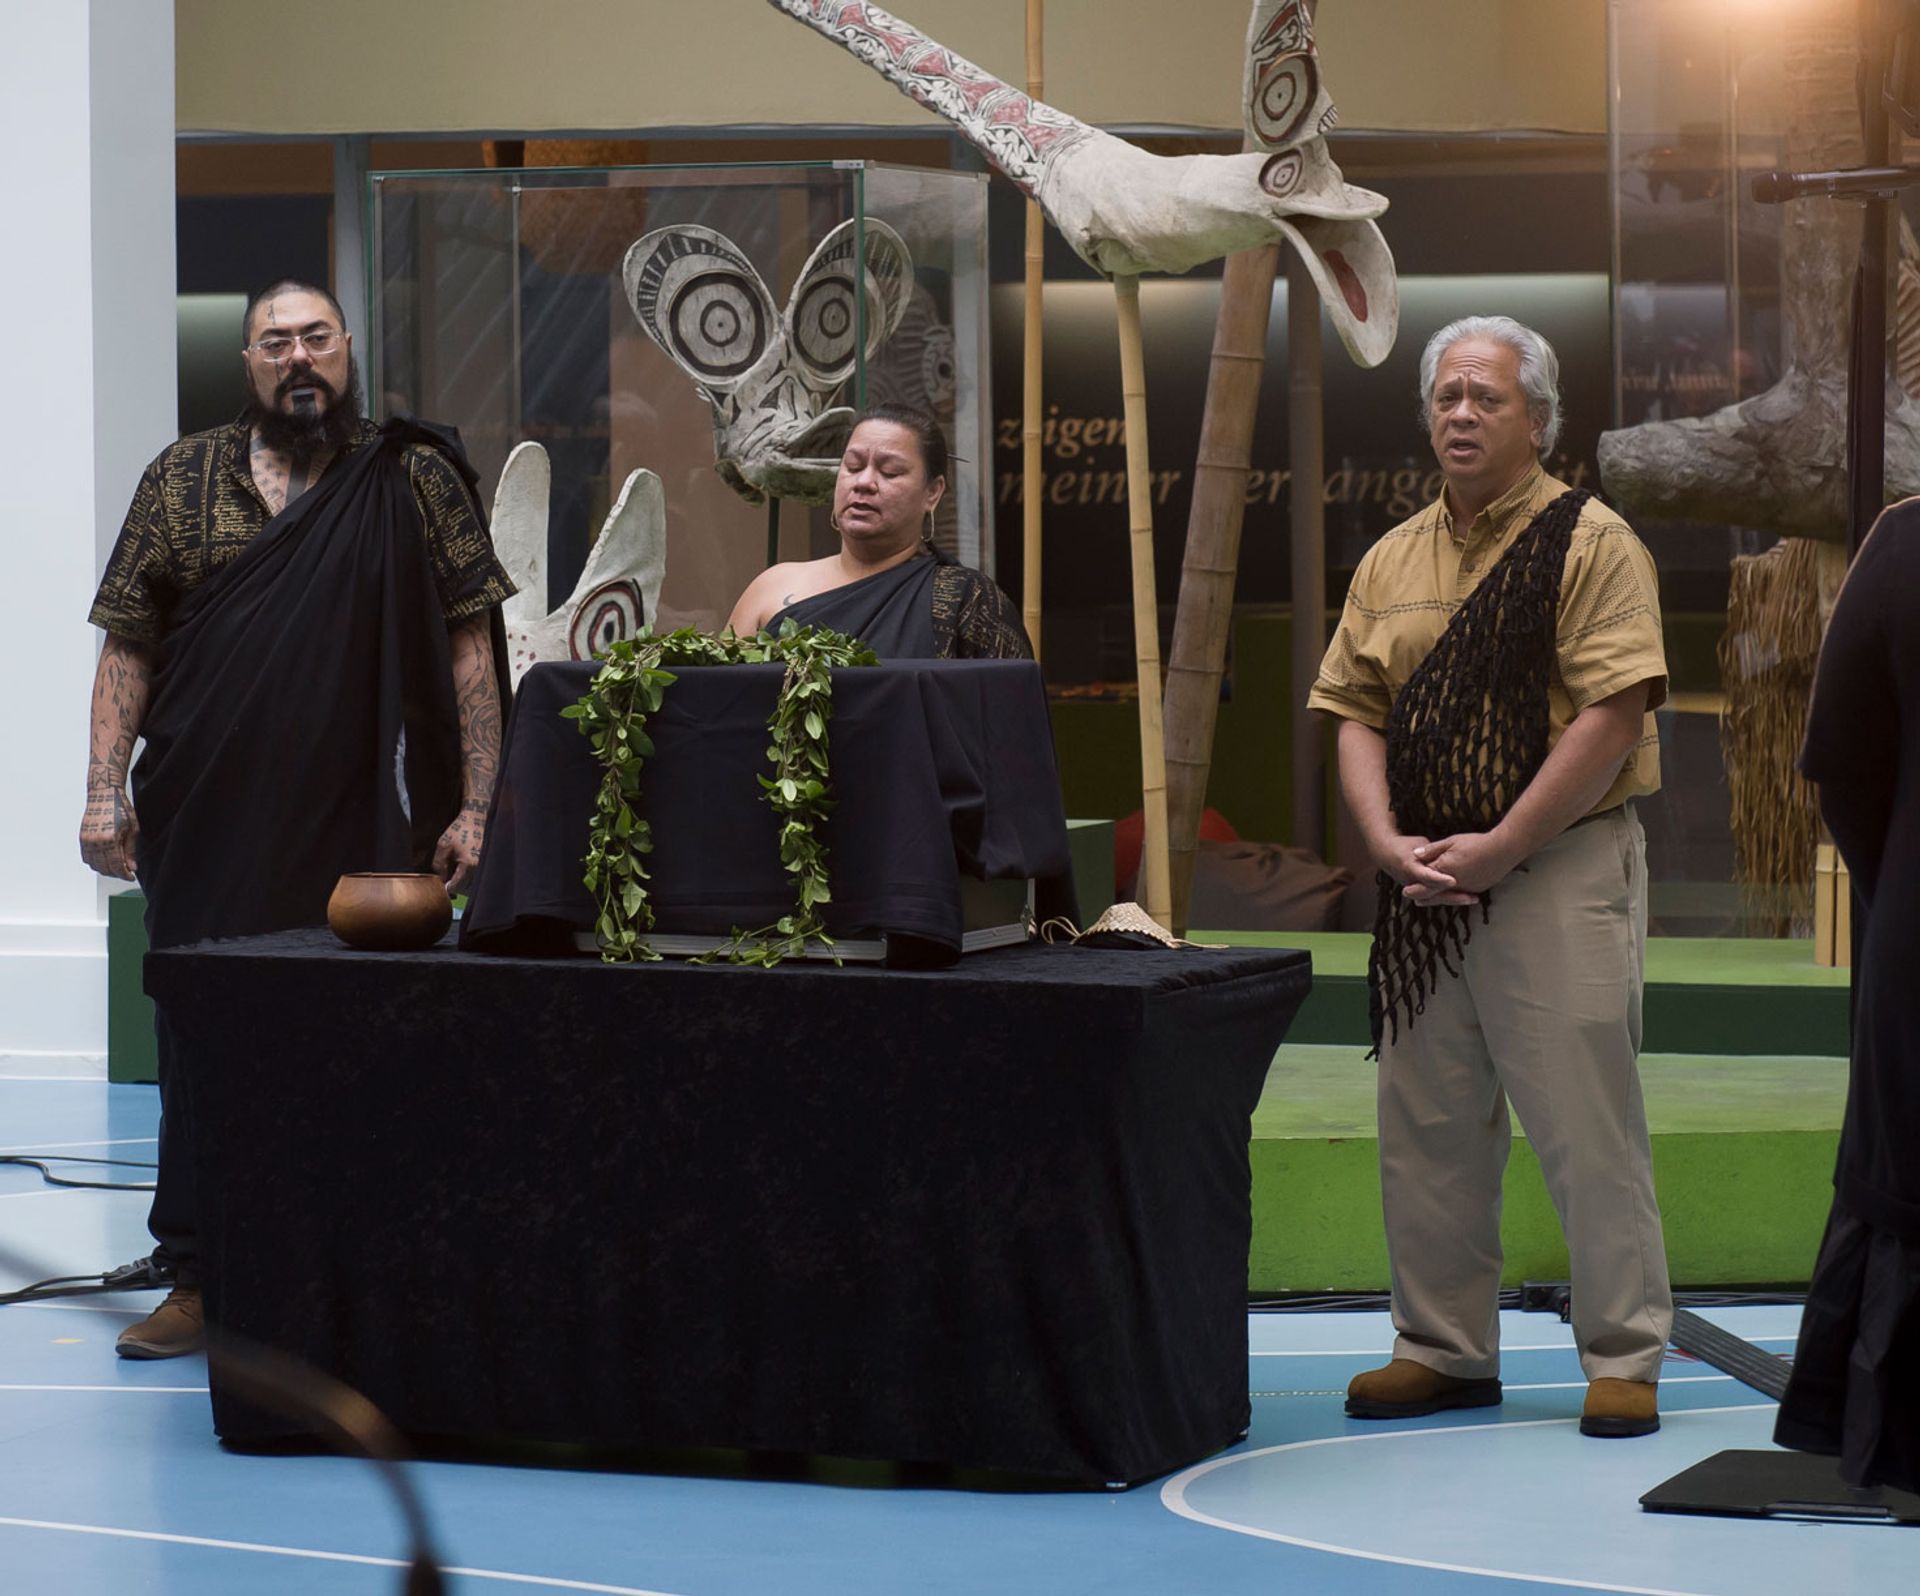 Representatives from the Office of Hawaiian Affairs at a restitution ceremony in Germany earlier this month Courtesy of Office of Hawaiian Affairs